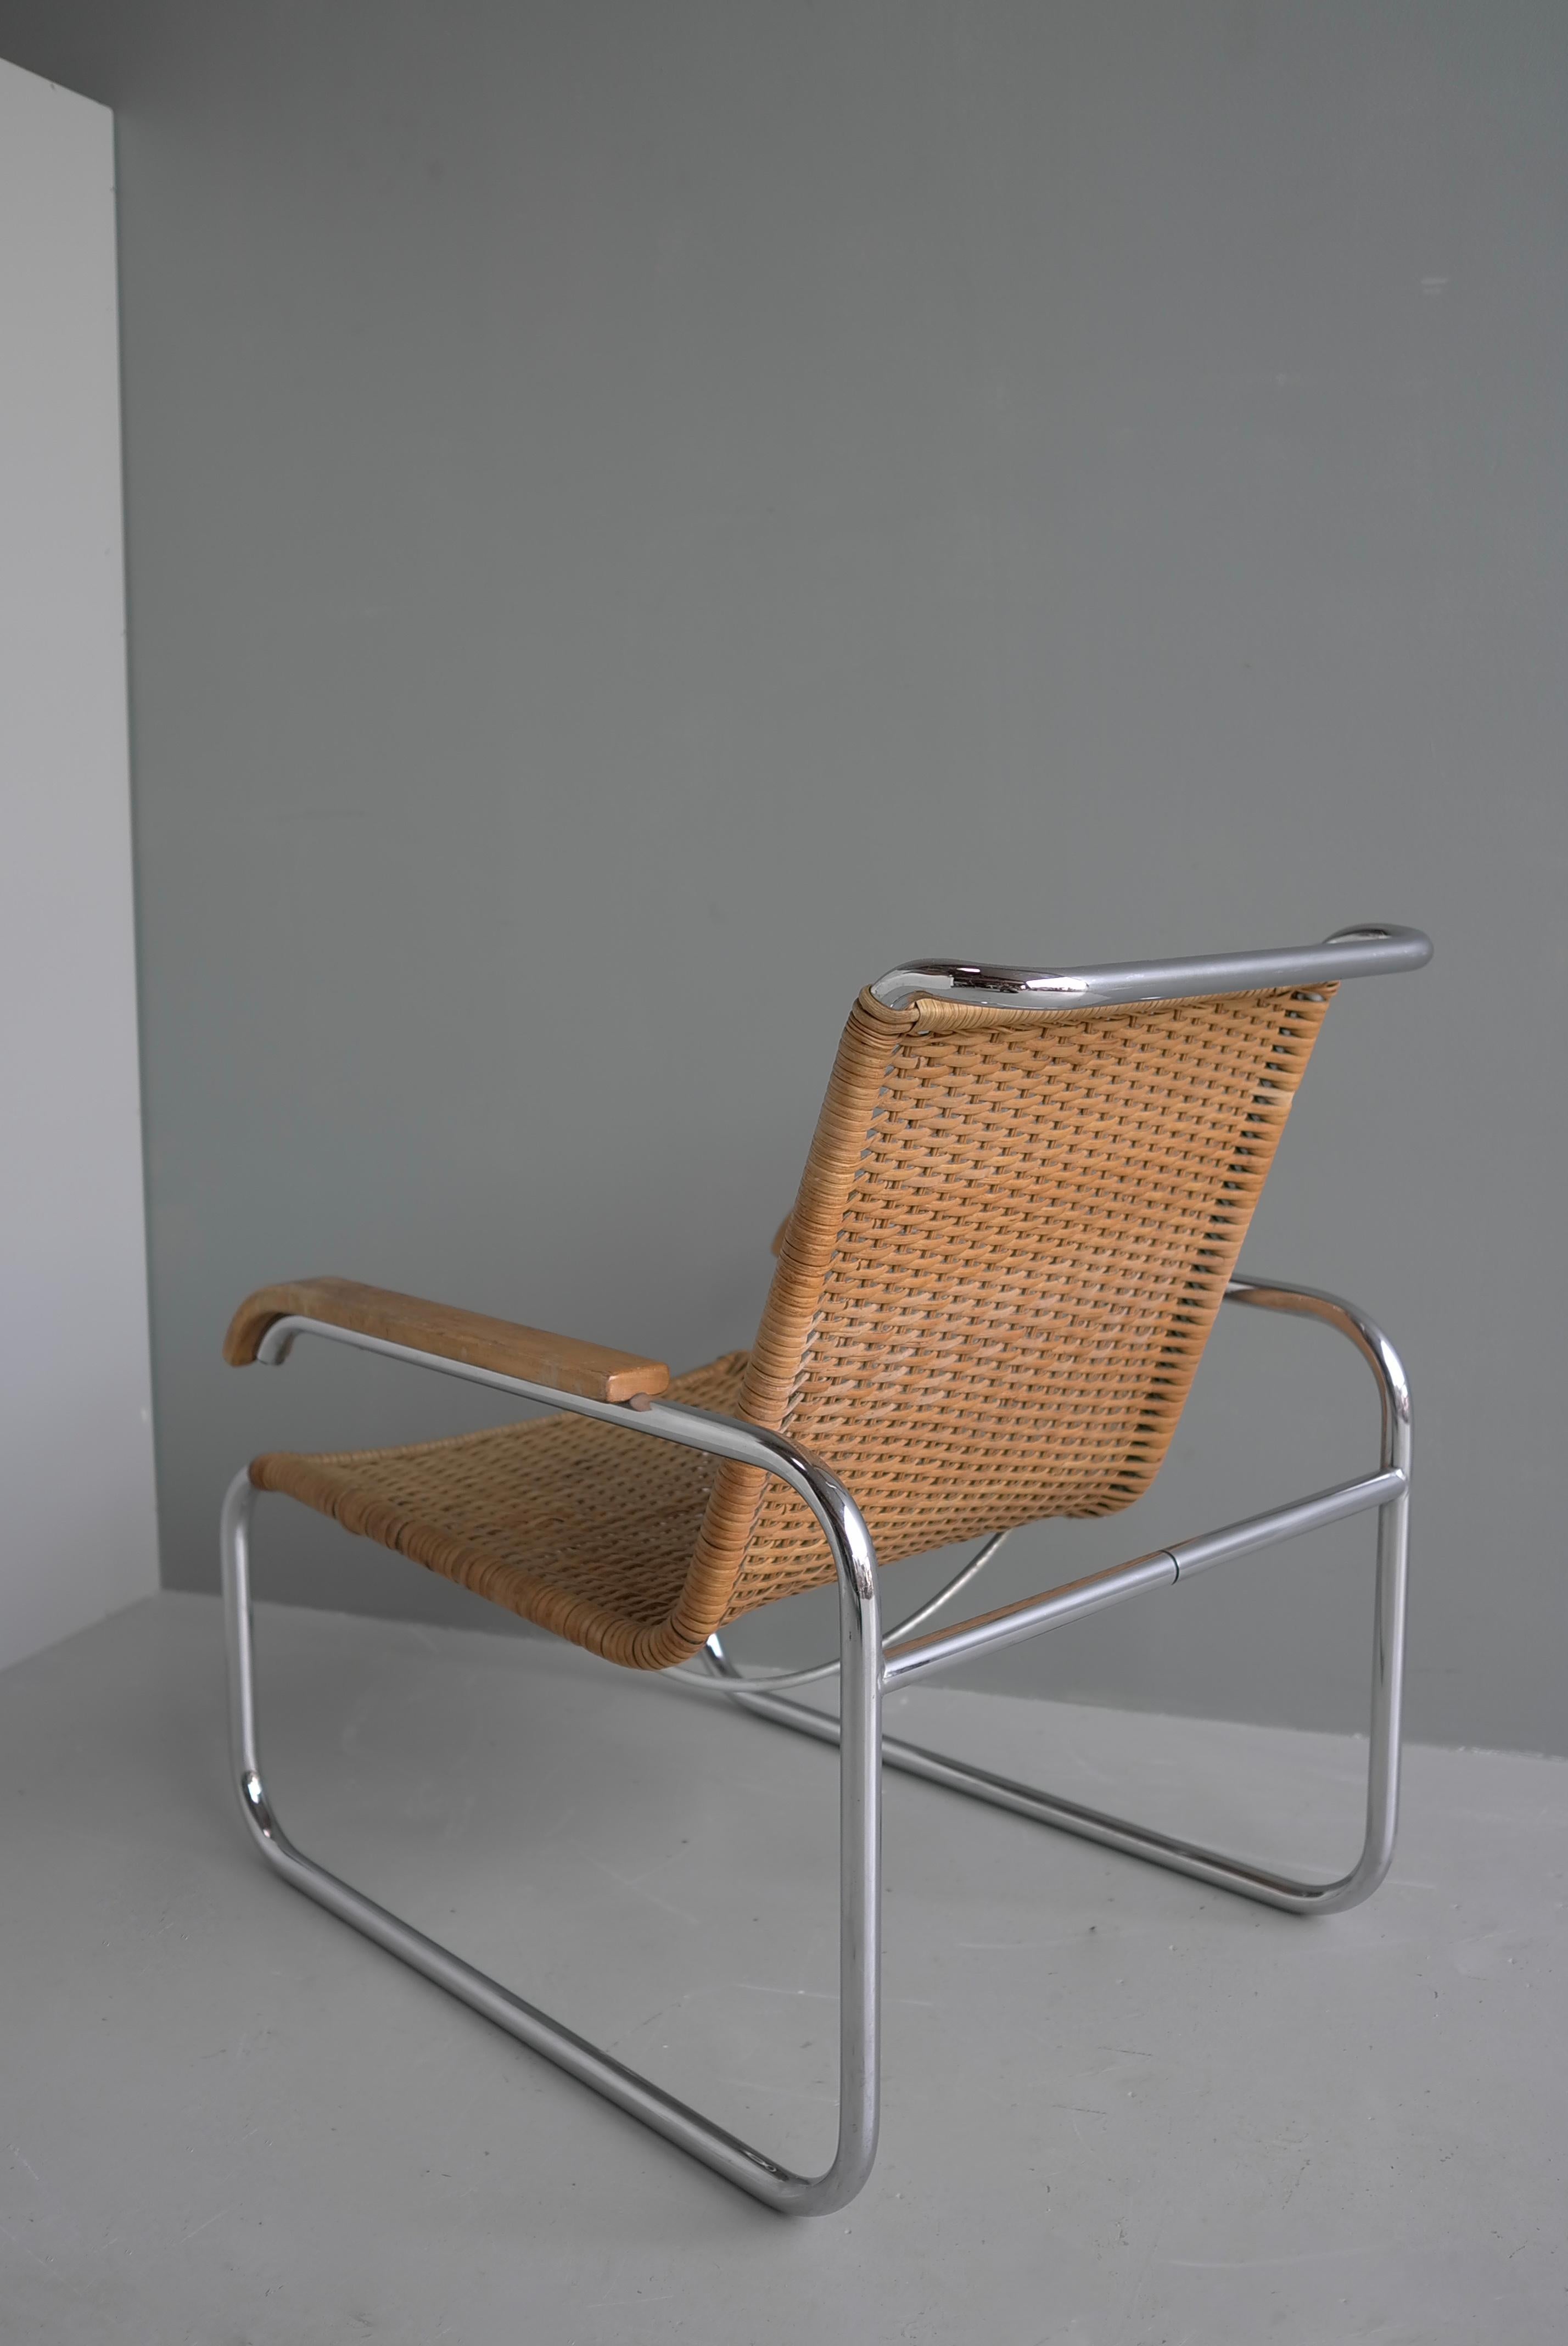 German Marcel Breuer B35 Wicker and Chrome Armchair by Thonet 1960's For Sale